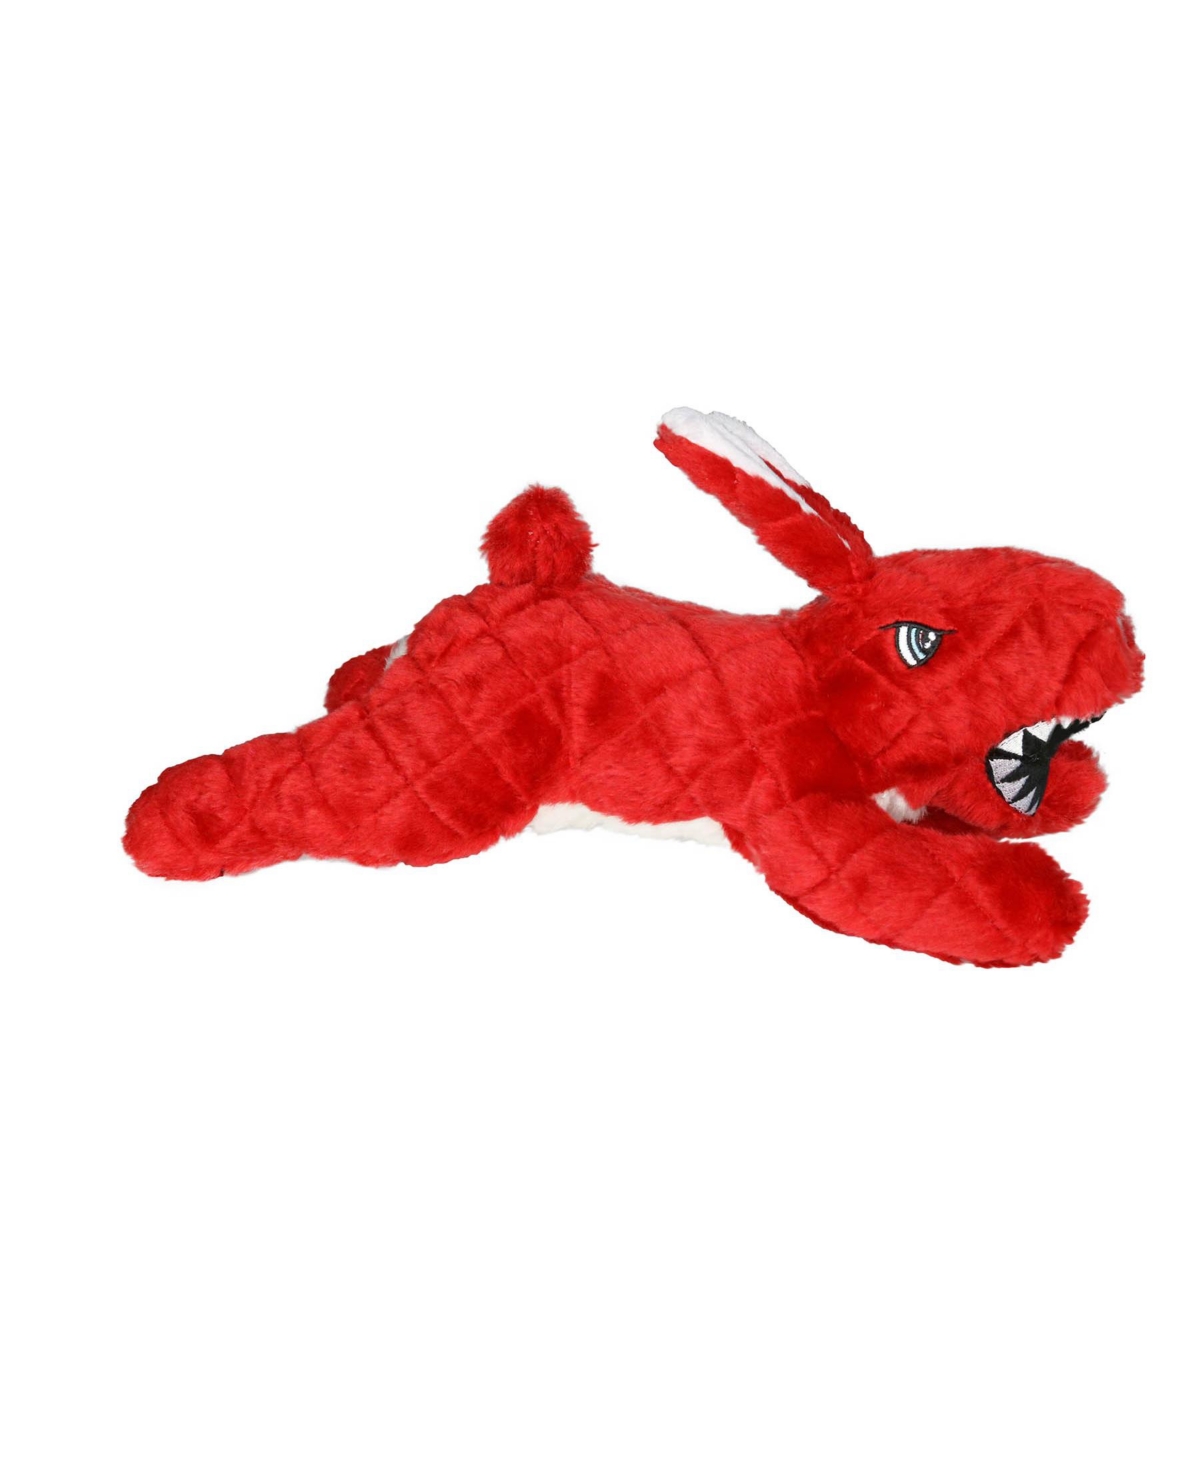 Angry Animals Rabbit, Dog Toy - Red